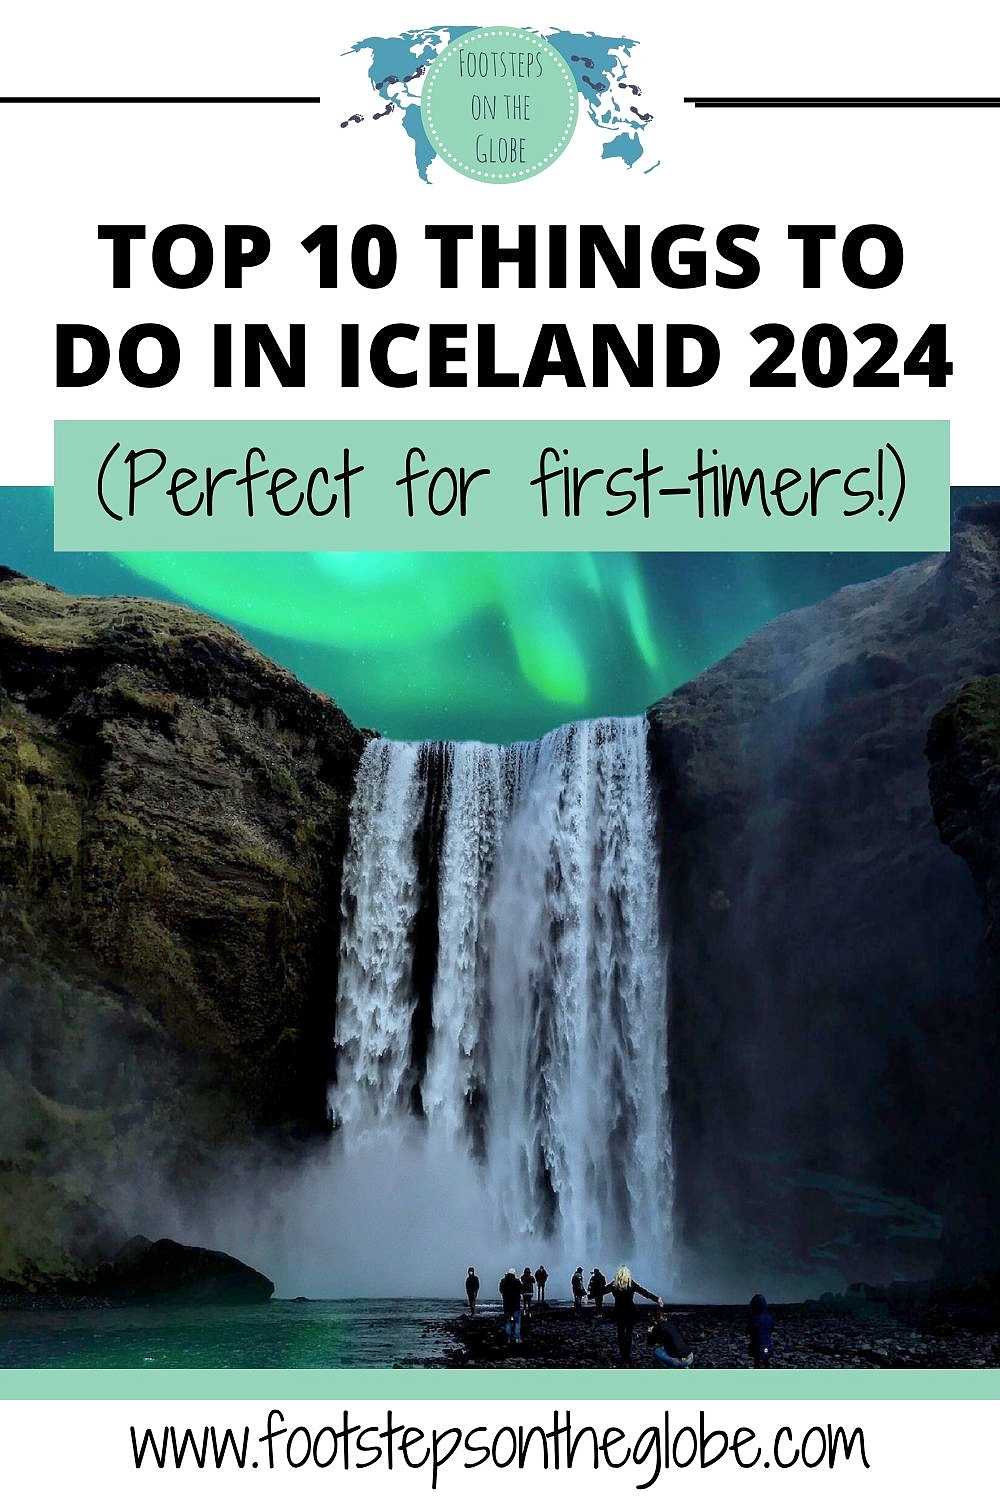 Pinterest image of someone standing on the edge of a rushing waterfall in Iceland with the text: "Top 10 things to do in Iceland 2024 - perfect for first-timers!"